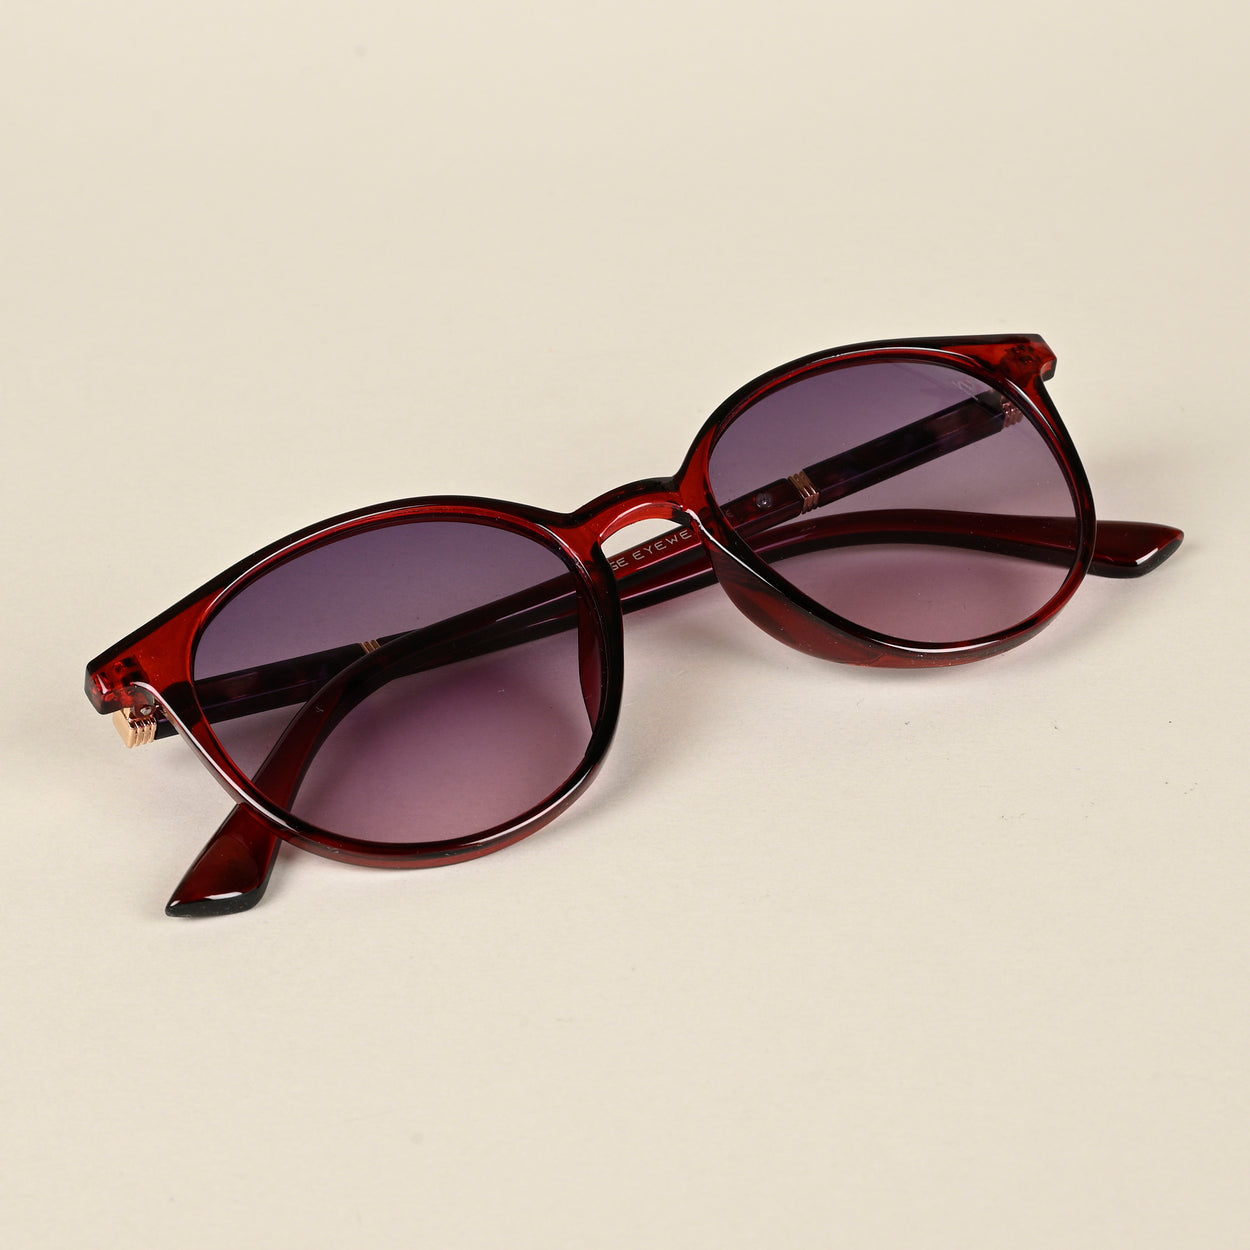 Voyage Purple & Pink Round Sunglasses for Women - MG4270